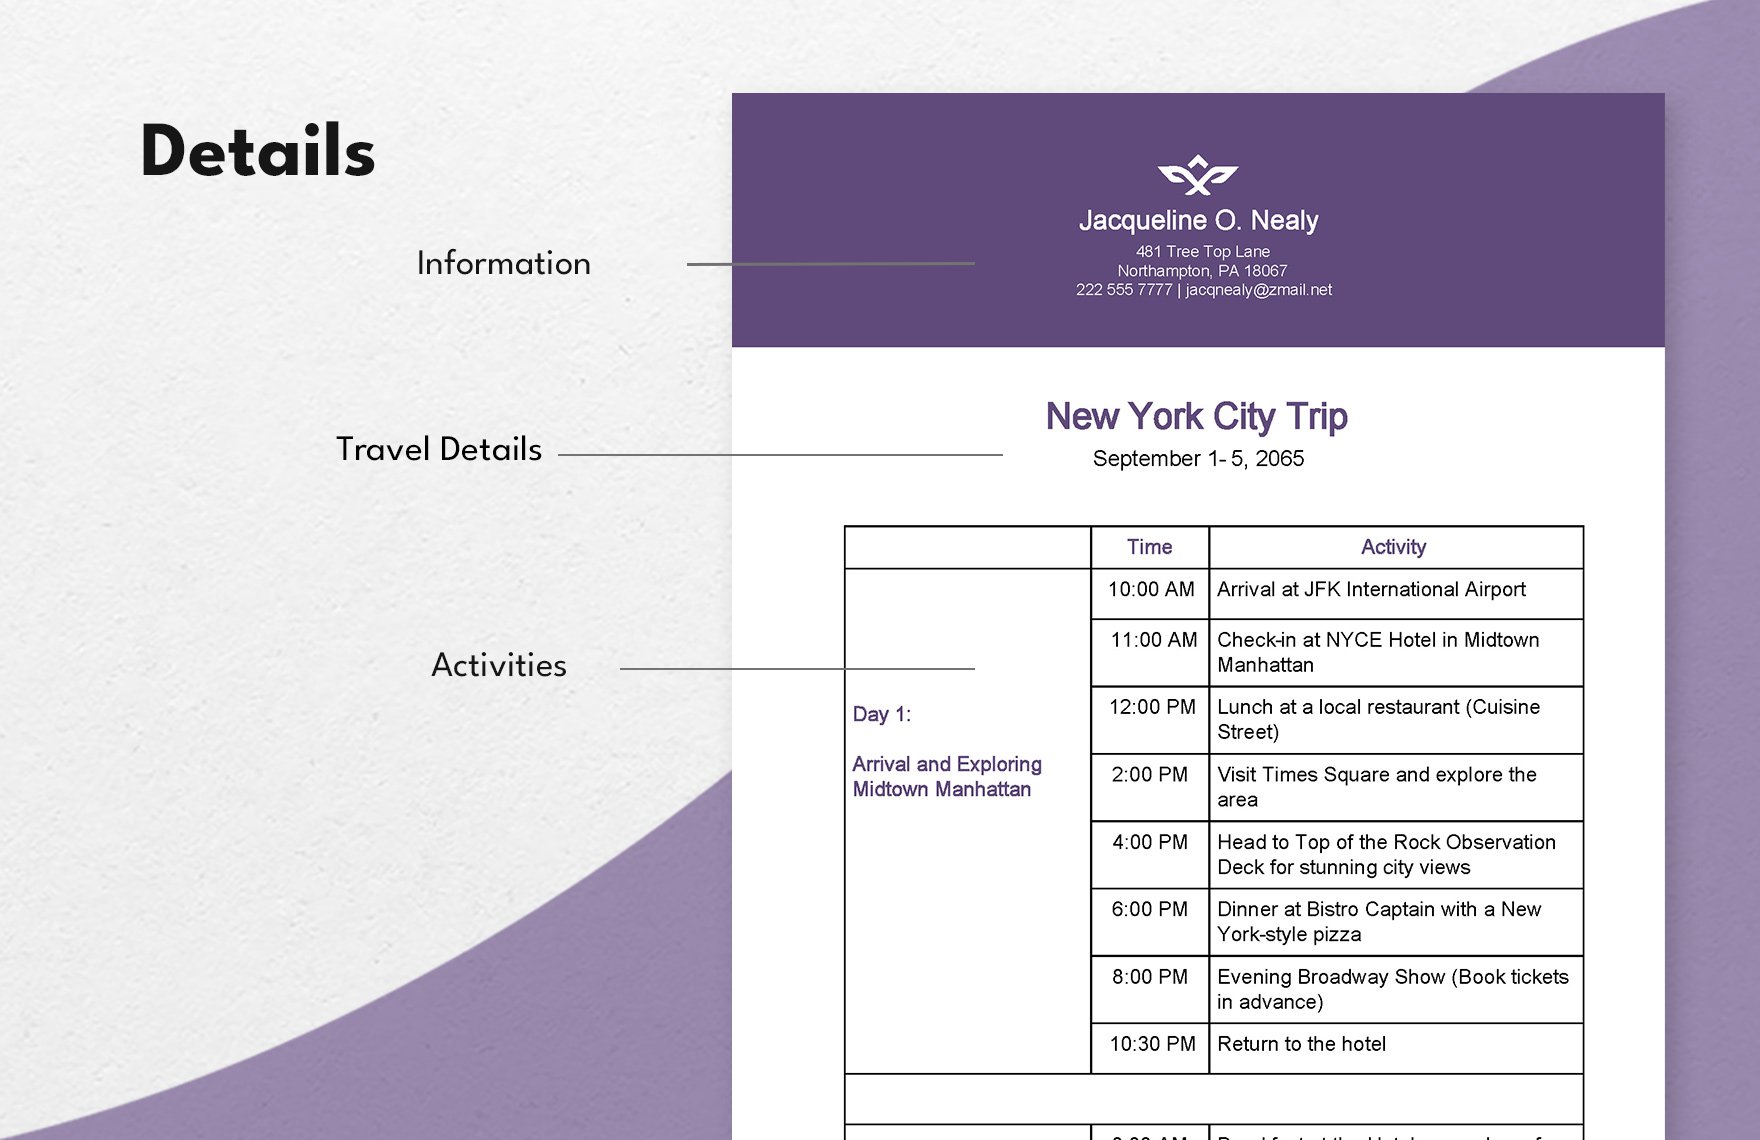 Group Itinerary Template